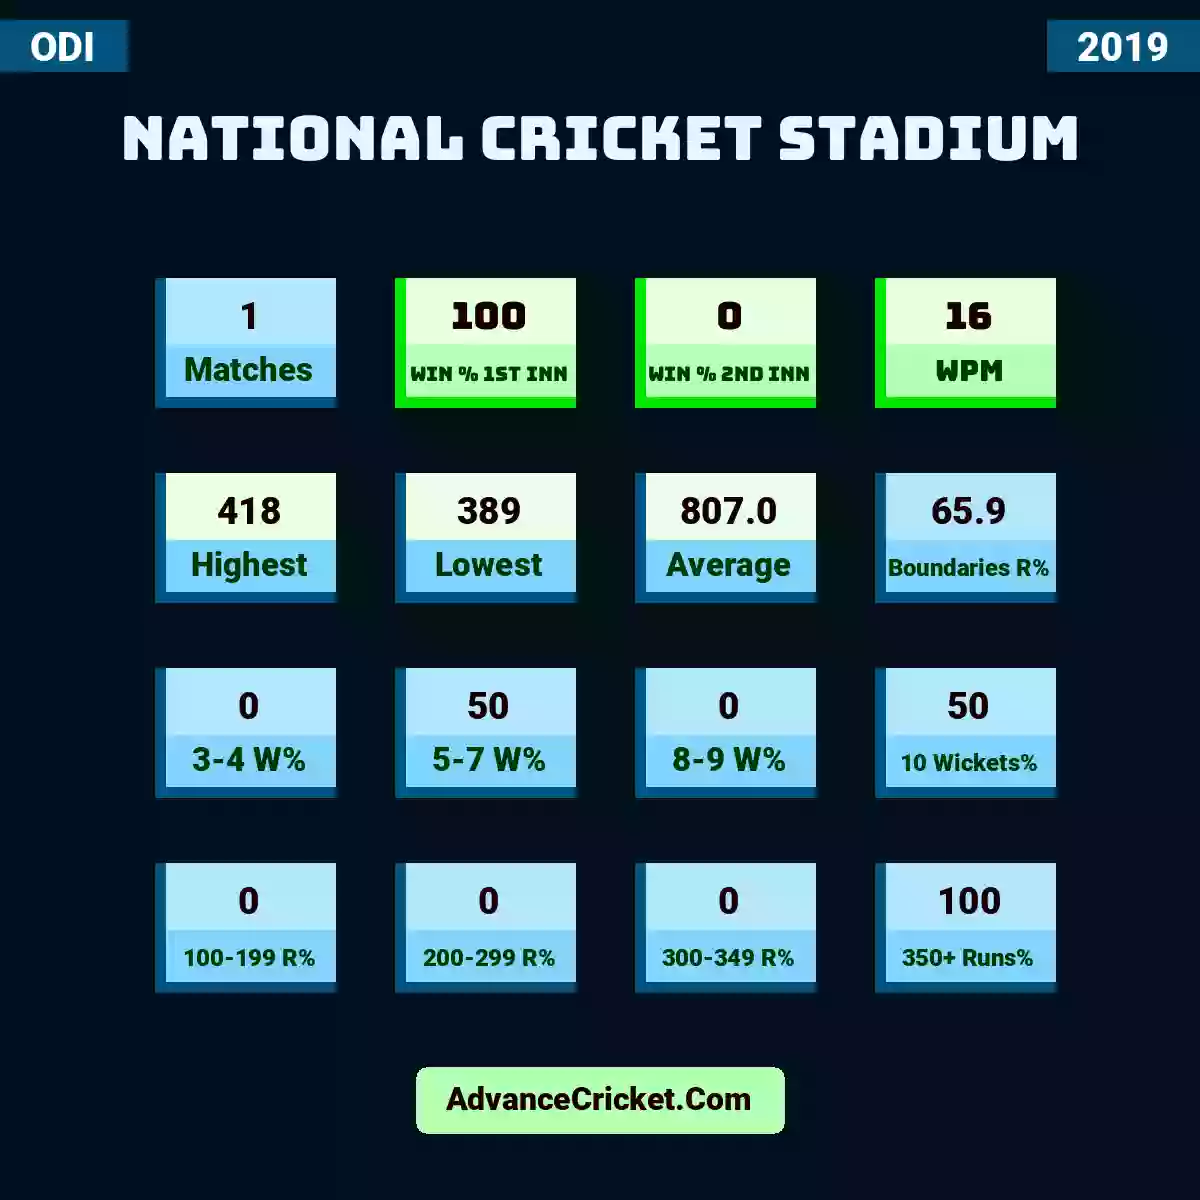 Image showing National Cricket Stadium with Matches: 1, Win % 1st Inn: 100, Win % 2nd Inn: 0, WPM: 16, Highest: 418, Lowest: 389, Average: 807.0, Boundaries R%: 65.9, 3-4 W%: 0, 5-7 W%: 50, 8-9 W%: 0, 10 Wickets%: 50, 100-199 R%: 0, 200-299 R%: 0, 300-349 R%: 0, 350+ Runs%: 100.